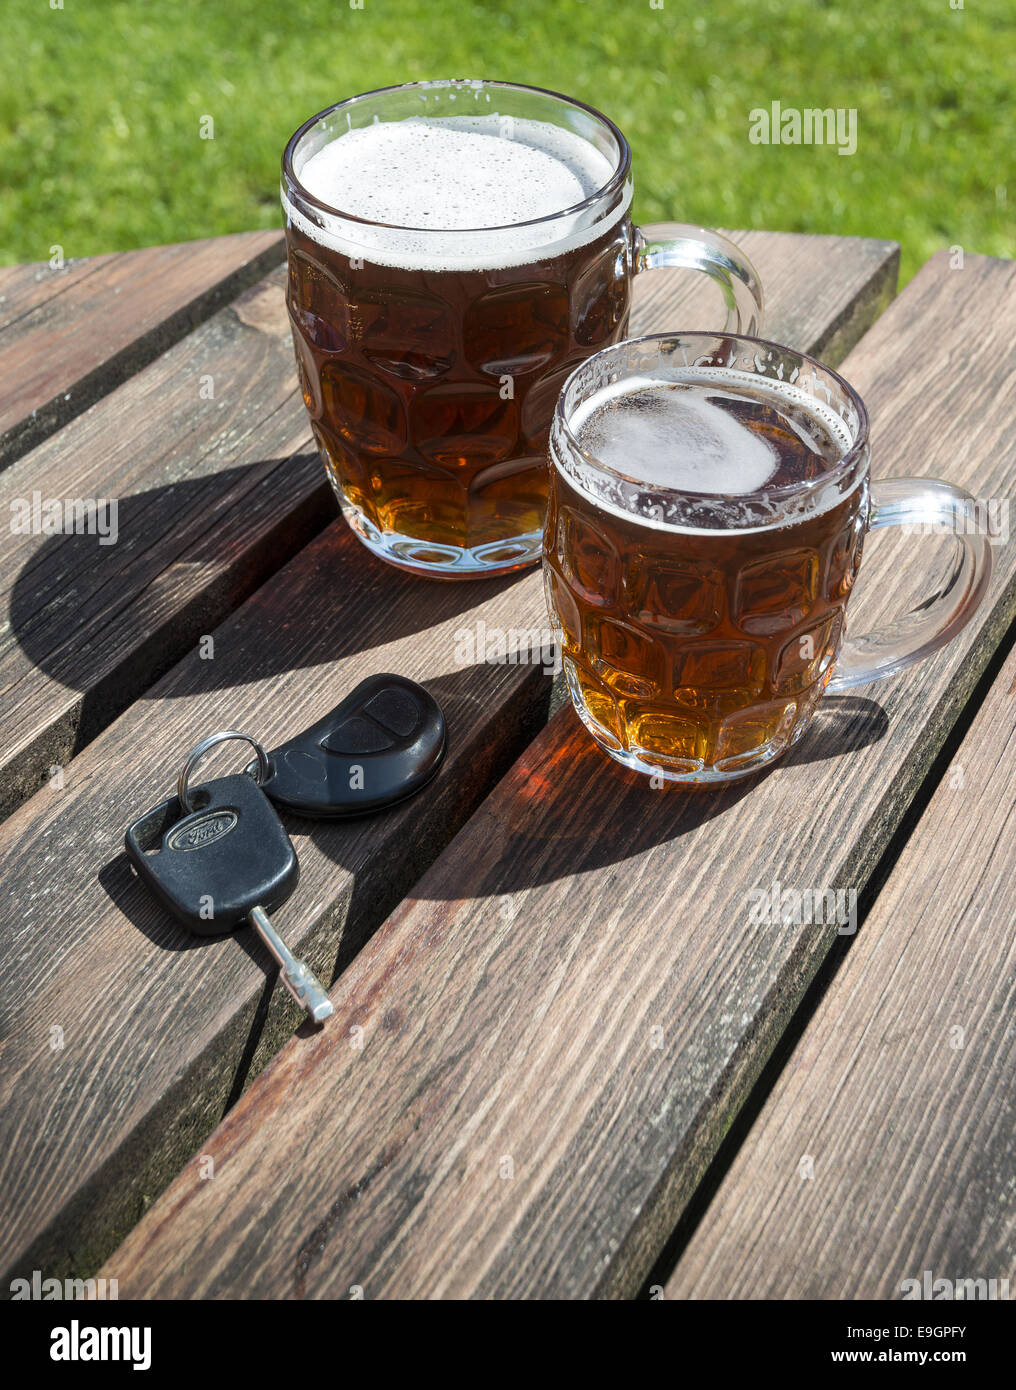 Car keys and pints of beer on a wooden beer garden table Stock Photo